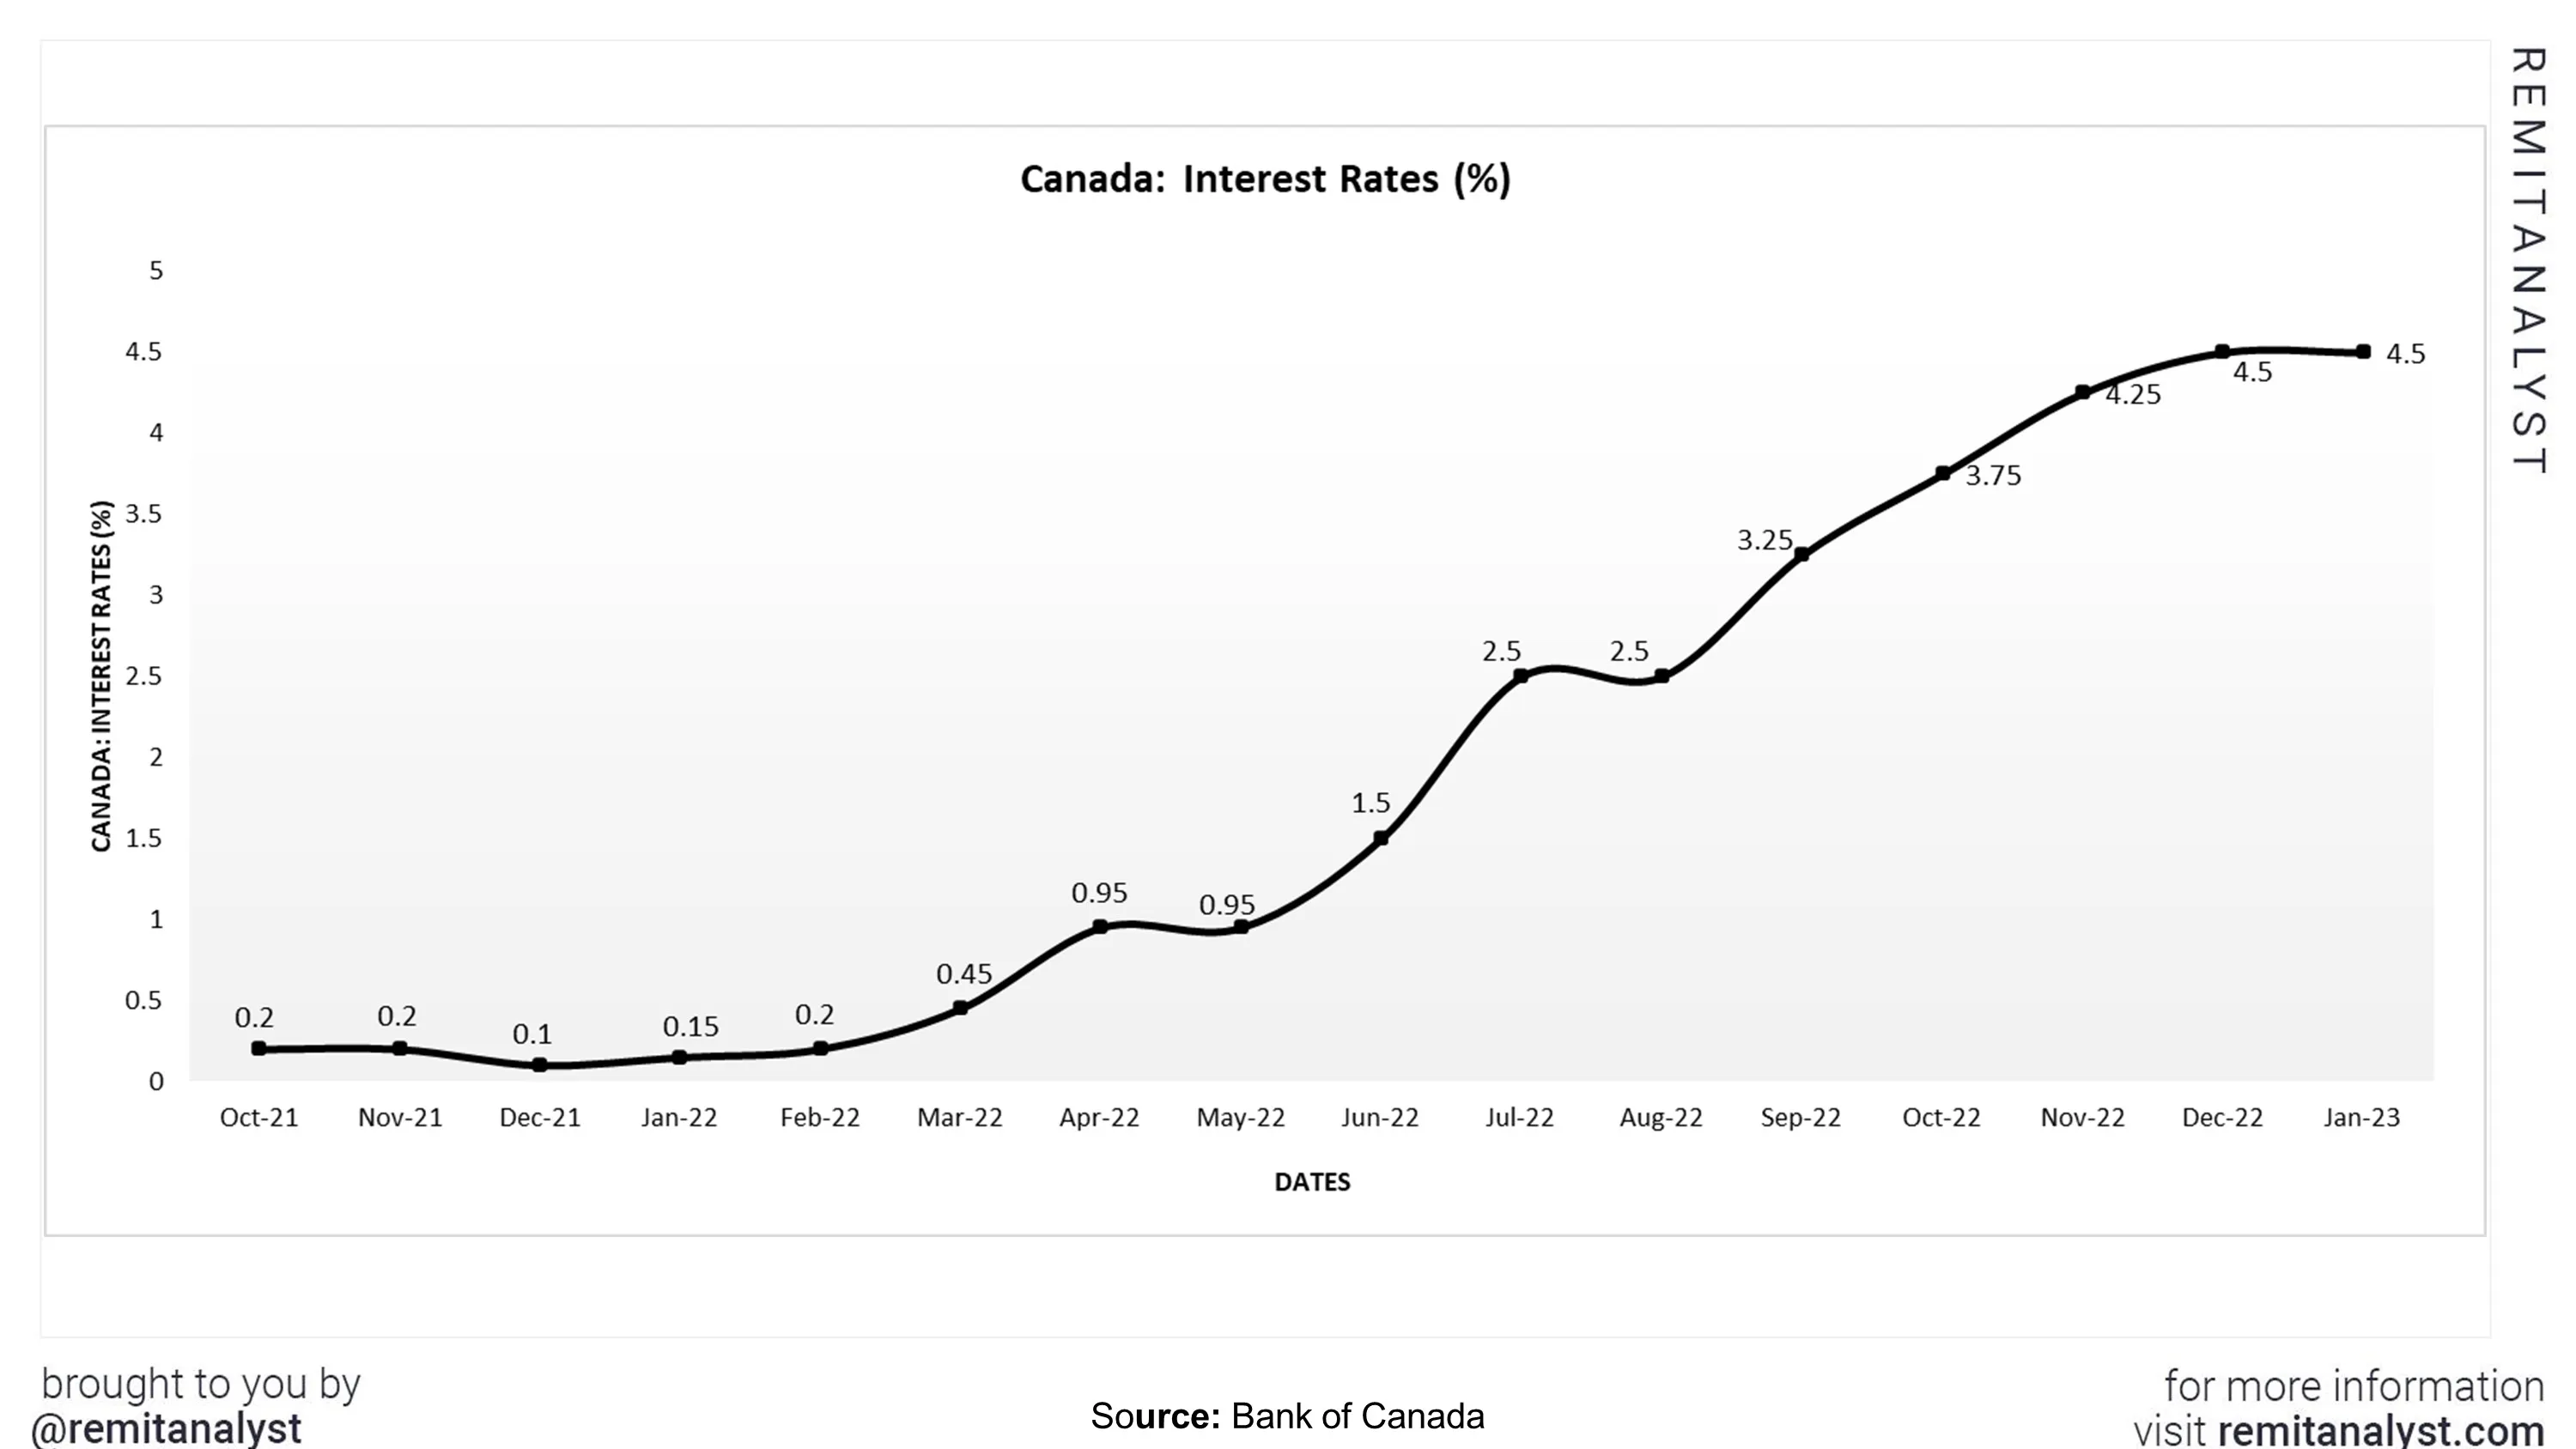 interest-rates-canada-from-oct-2021-to-jan-2023